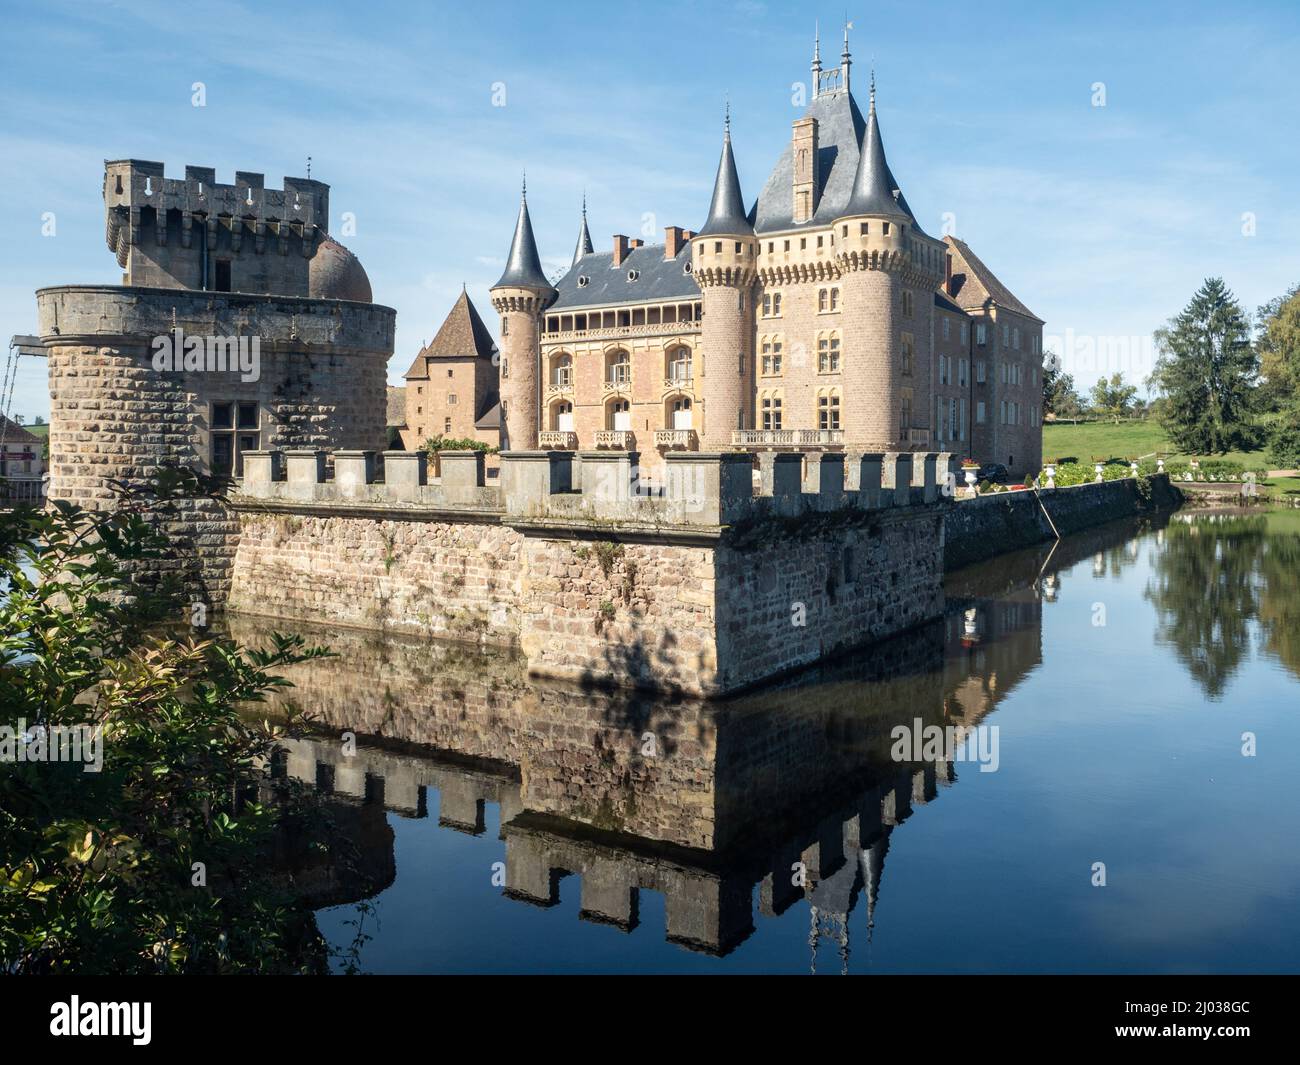 Chateau dating from between 14th and 19th centuries, of the town of La Clayette, Saone-et-Loire, in southern Burgundy, France, Europe Stock Photo